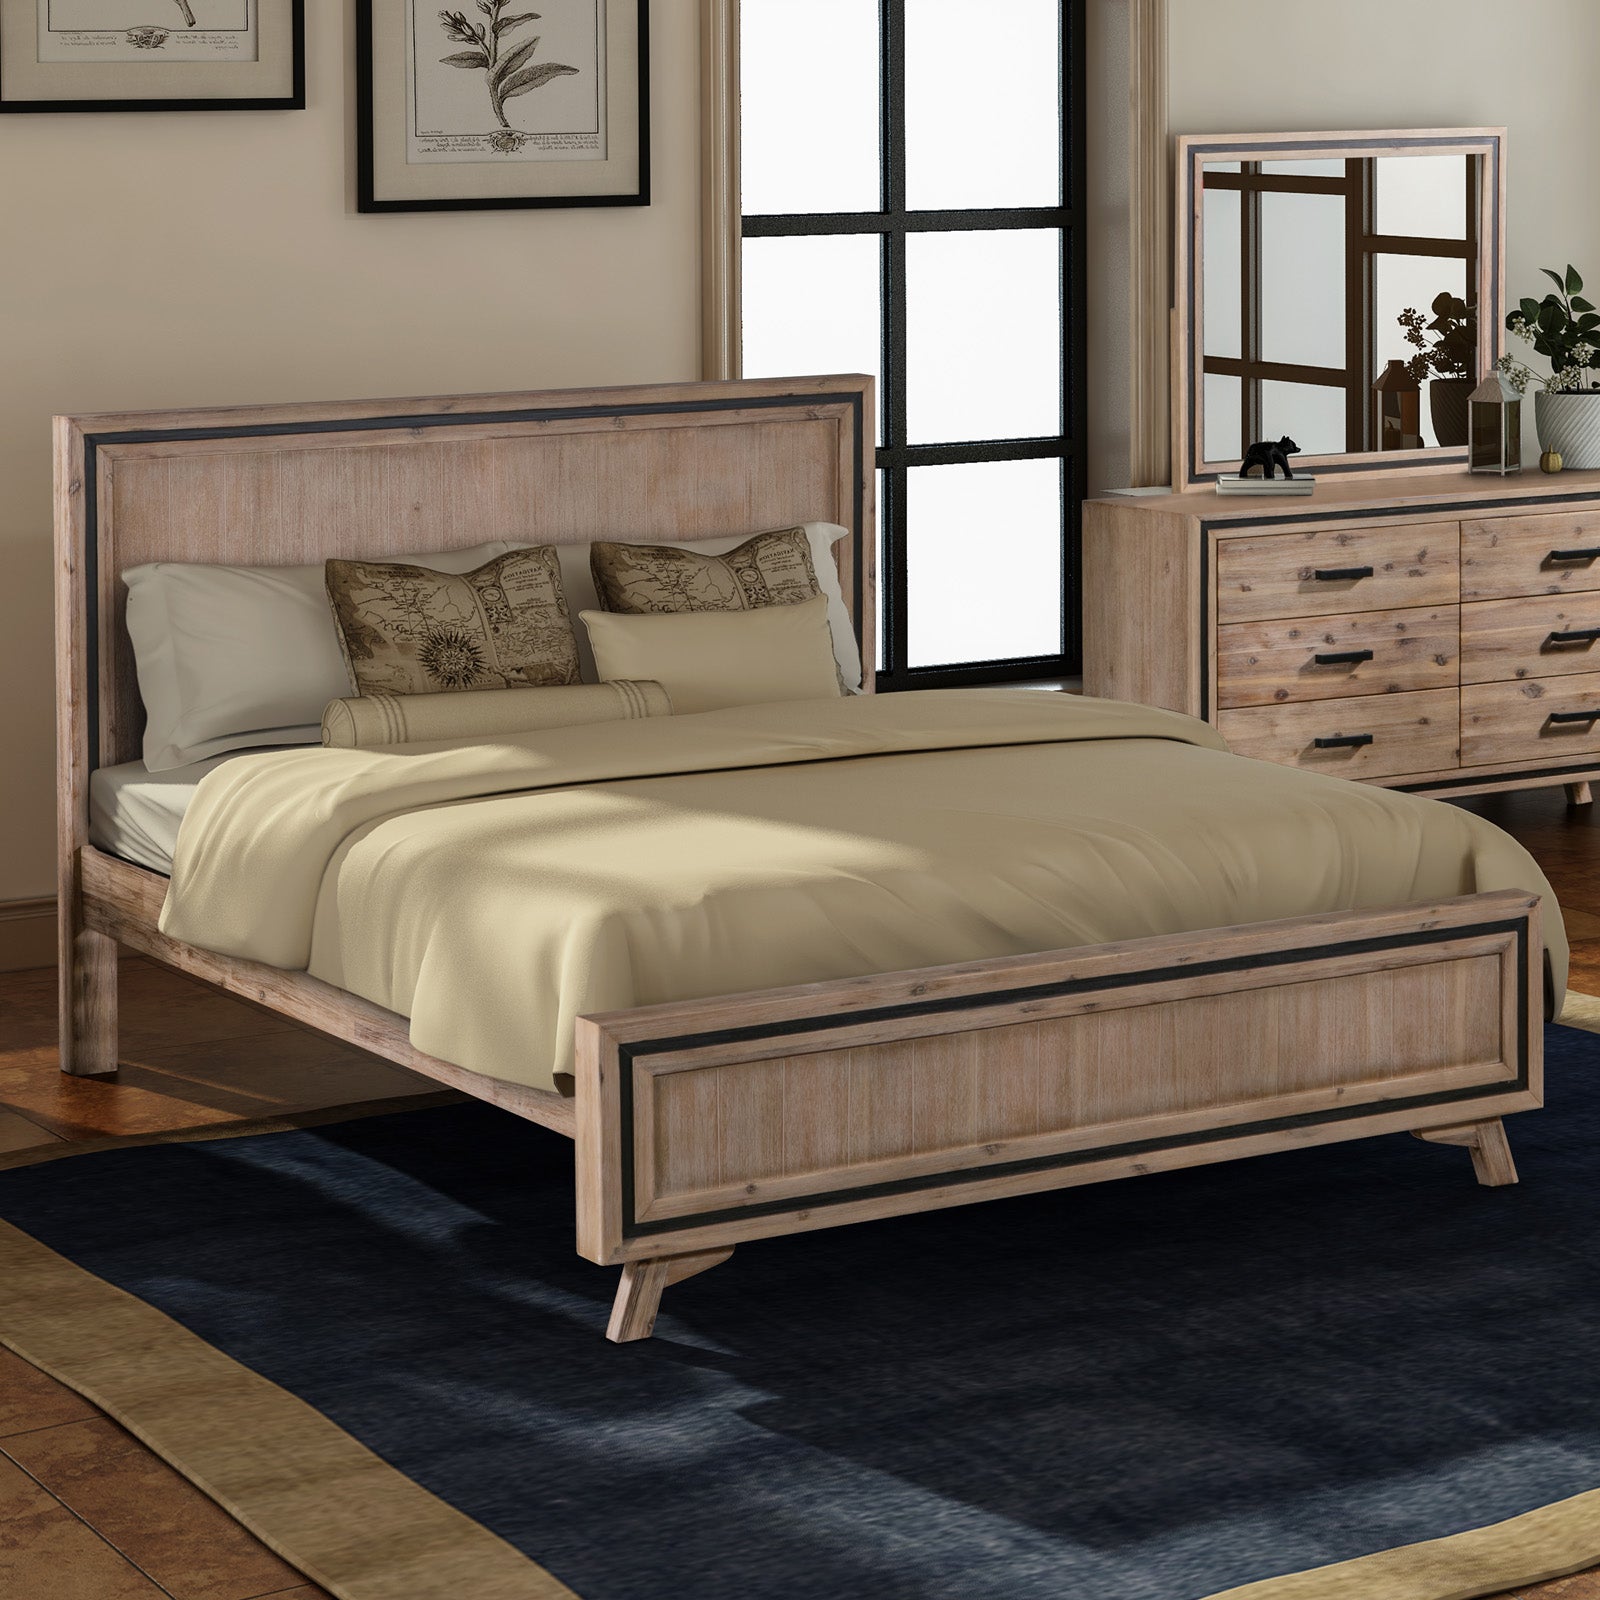 King Size Silver Brush Bed Frame in Acacia Wood Construction - SILBERSHELL